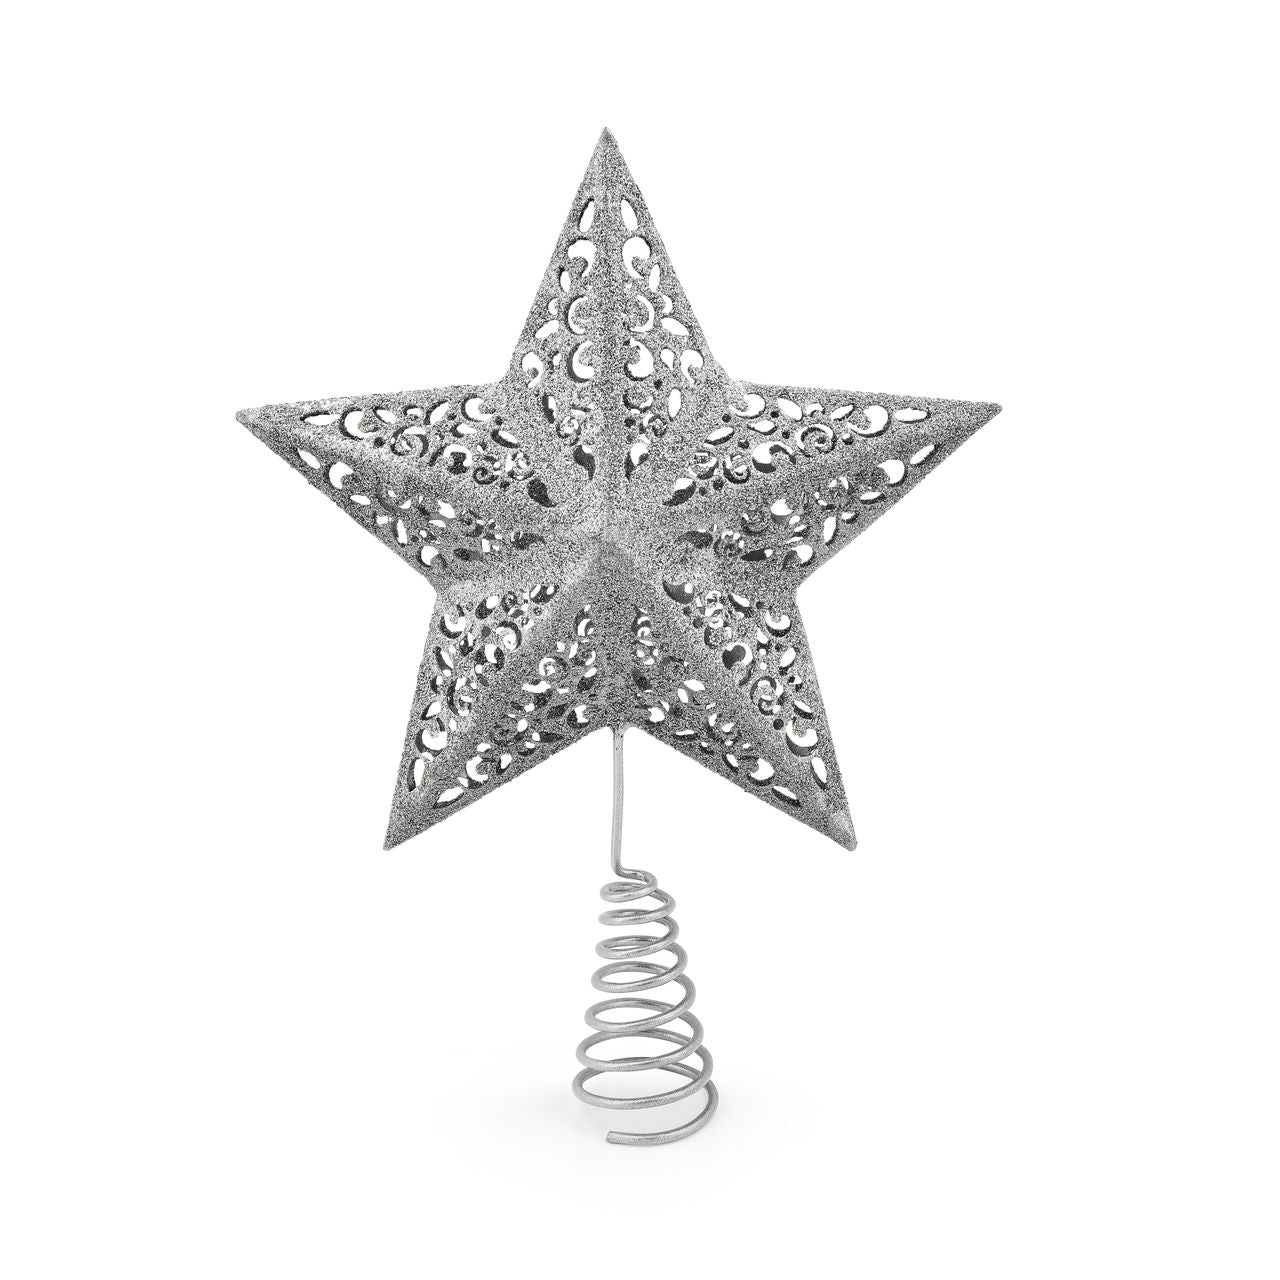 Silver Christmas Tree Topper  We just Love Christmas! The festive season, the giving of gifts, creating memories and being together with family and loved ones. Have lots of fun with our lovingly designed and created Christmas decorations, each one has a magic sparkle of elf dust!